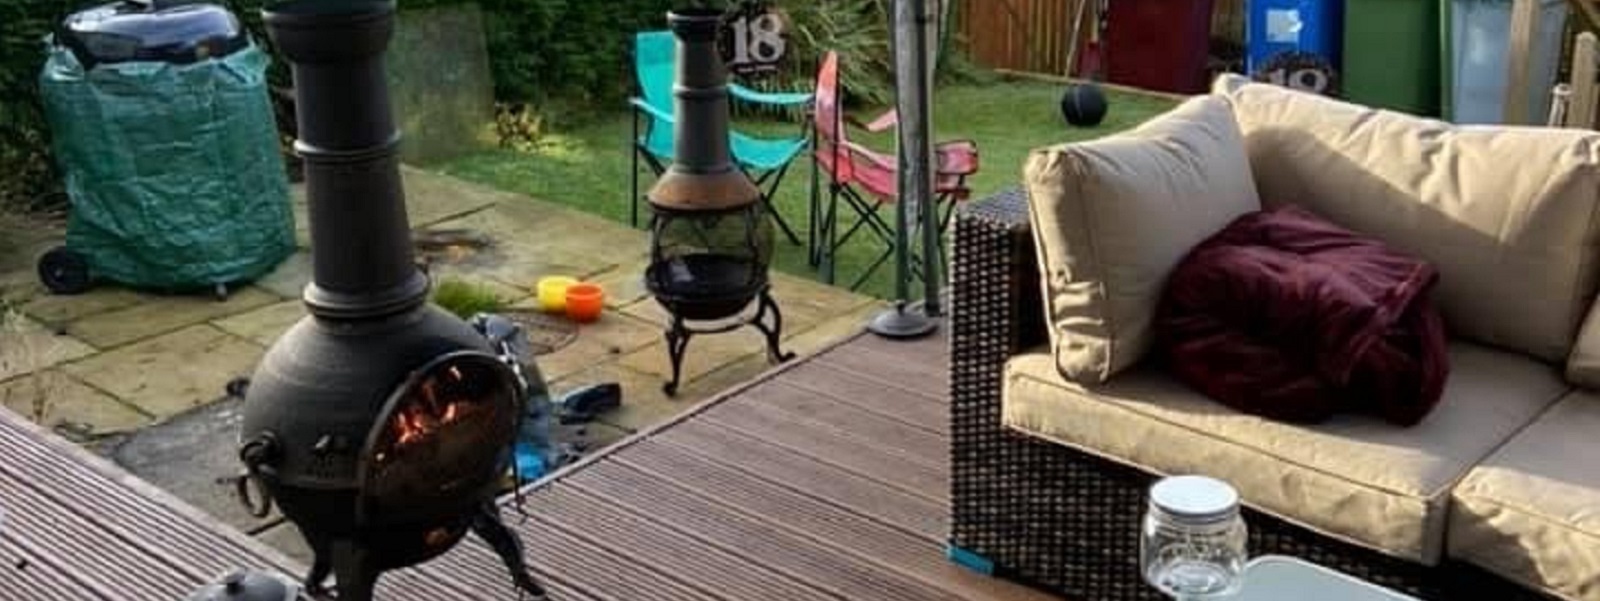 A garden with decking, furniture, and a chimnea